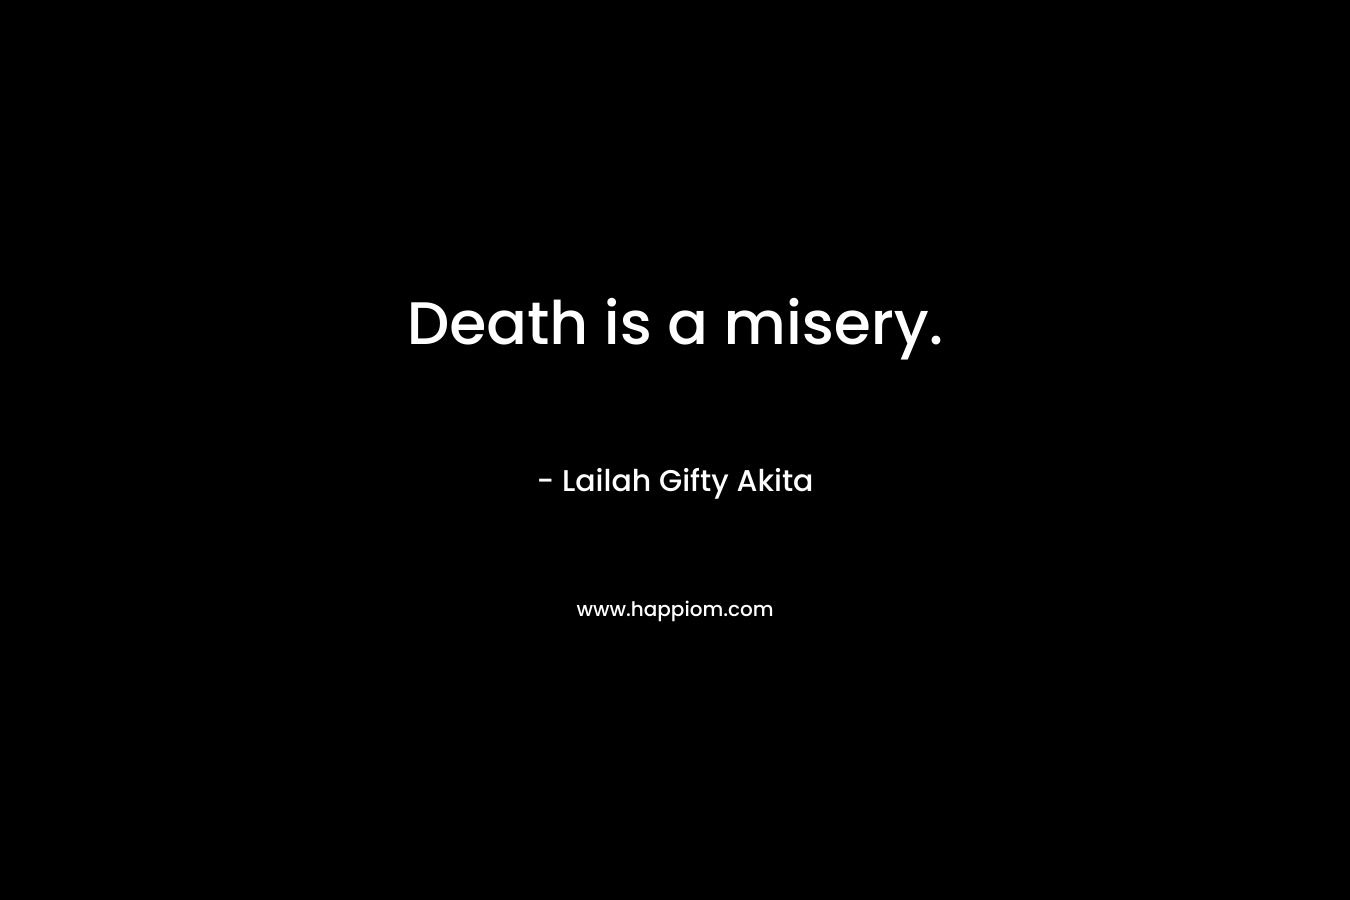 Death is a misery. – Lailah Gifty Akita